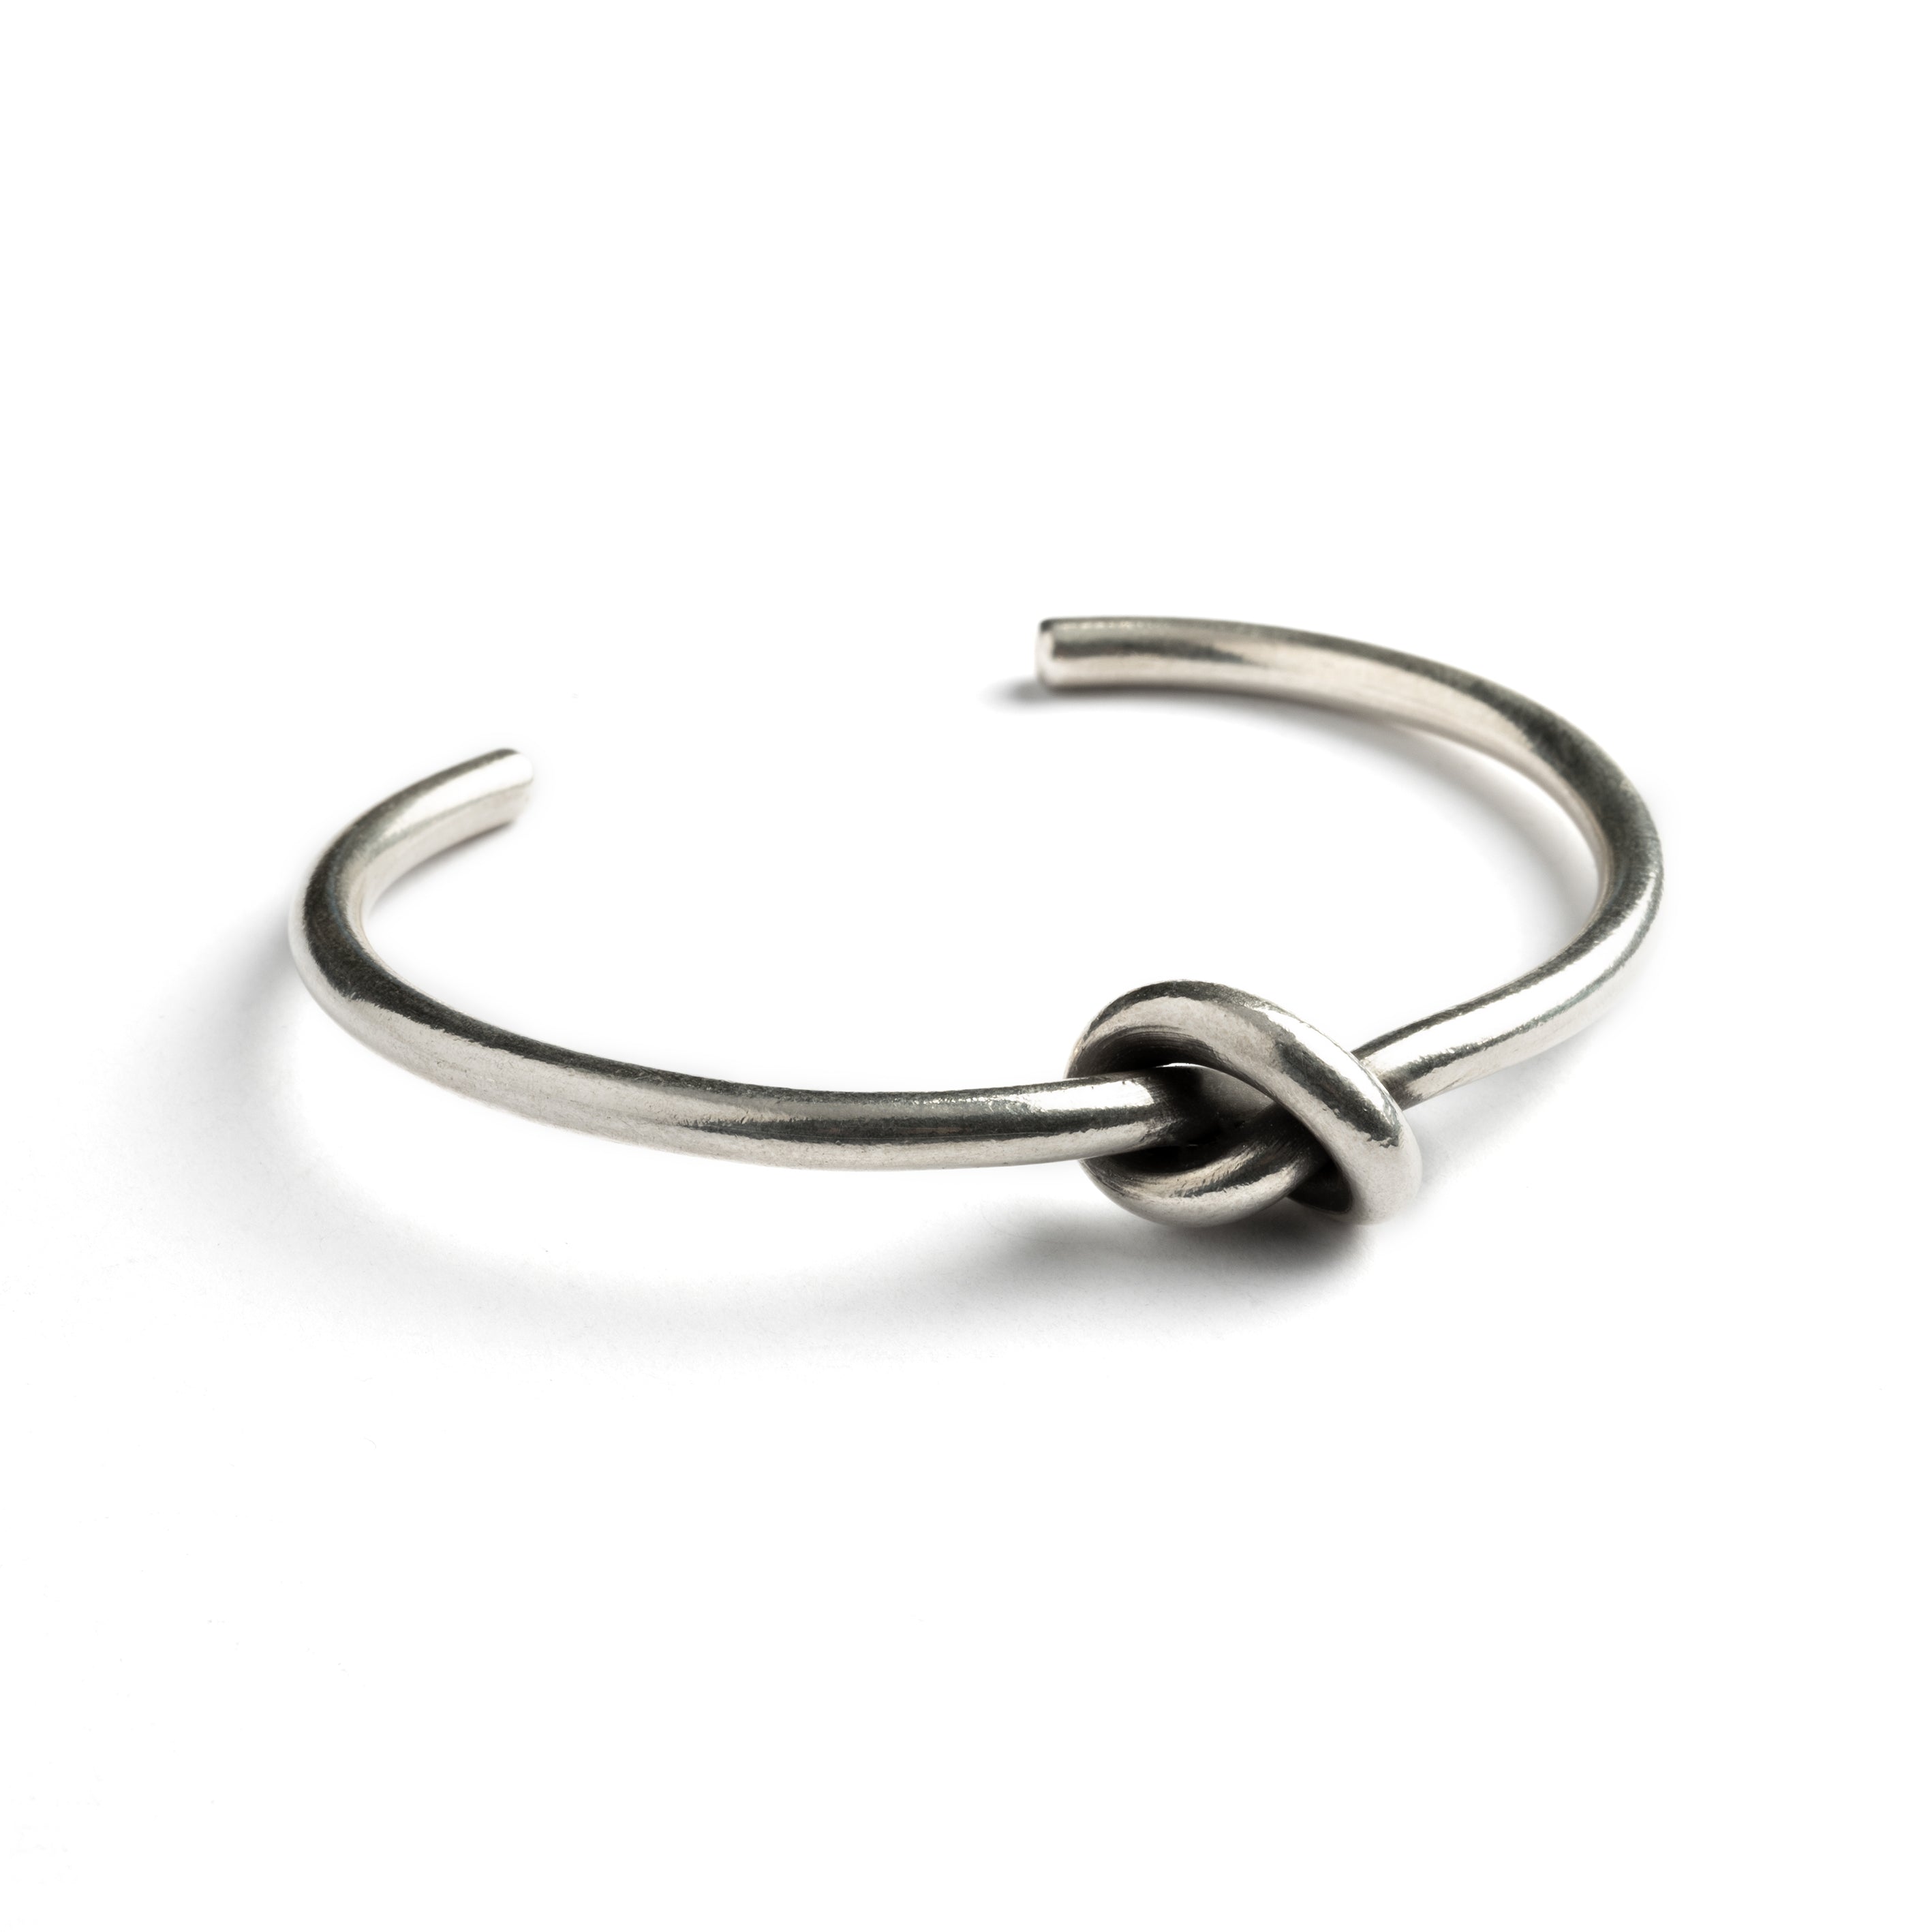 Silver Knot Bracelet right side view